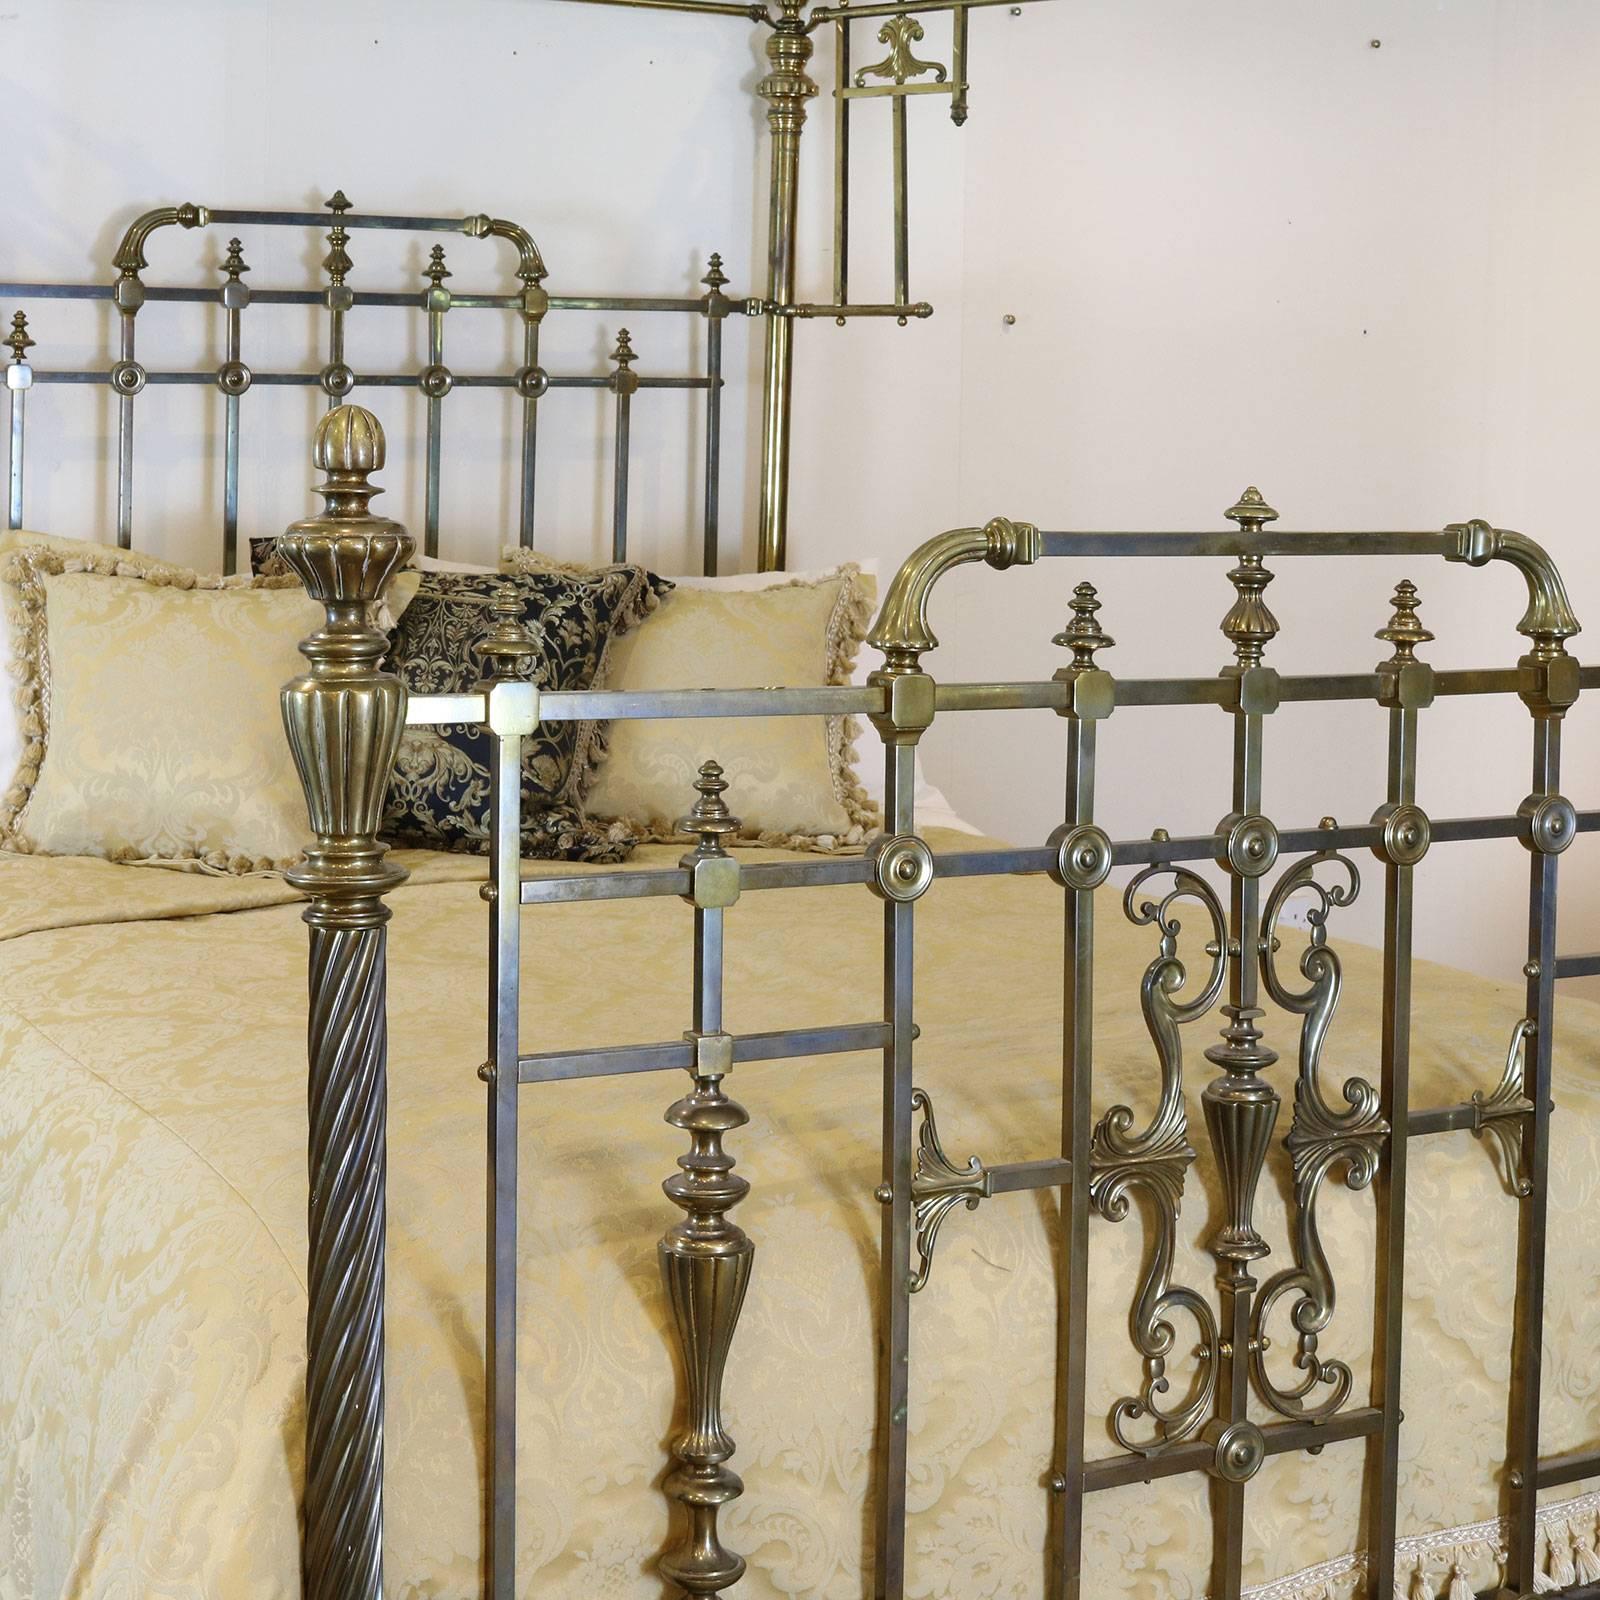 A superb example of a late Victorian half tester bed with ornate cast brass fittings, barley twist front posts and decorative central feature in the foot panel. At some time in its history the back posts have been lowered, and we can if required